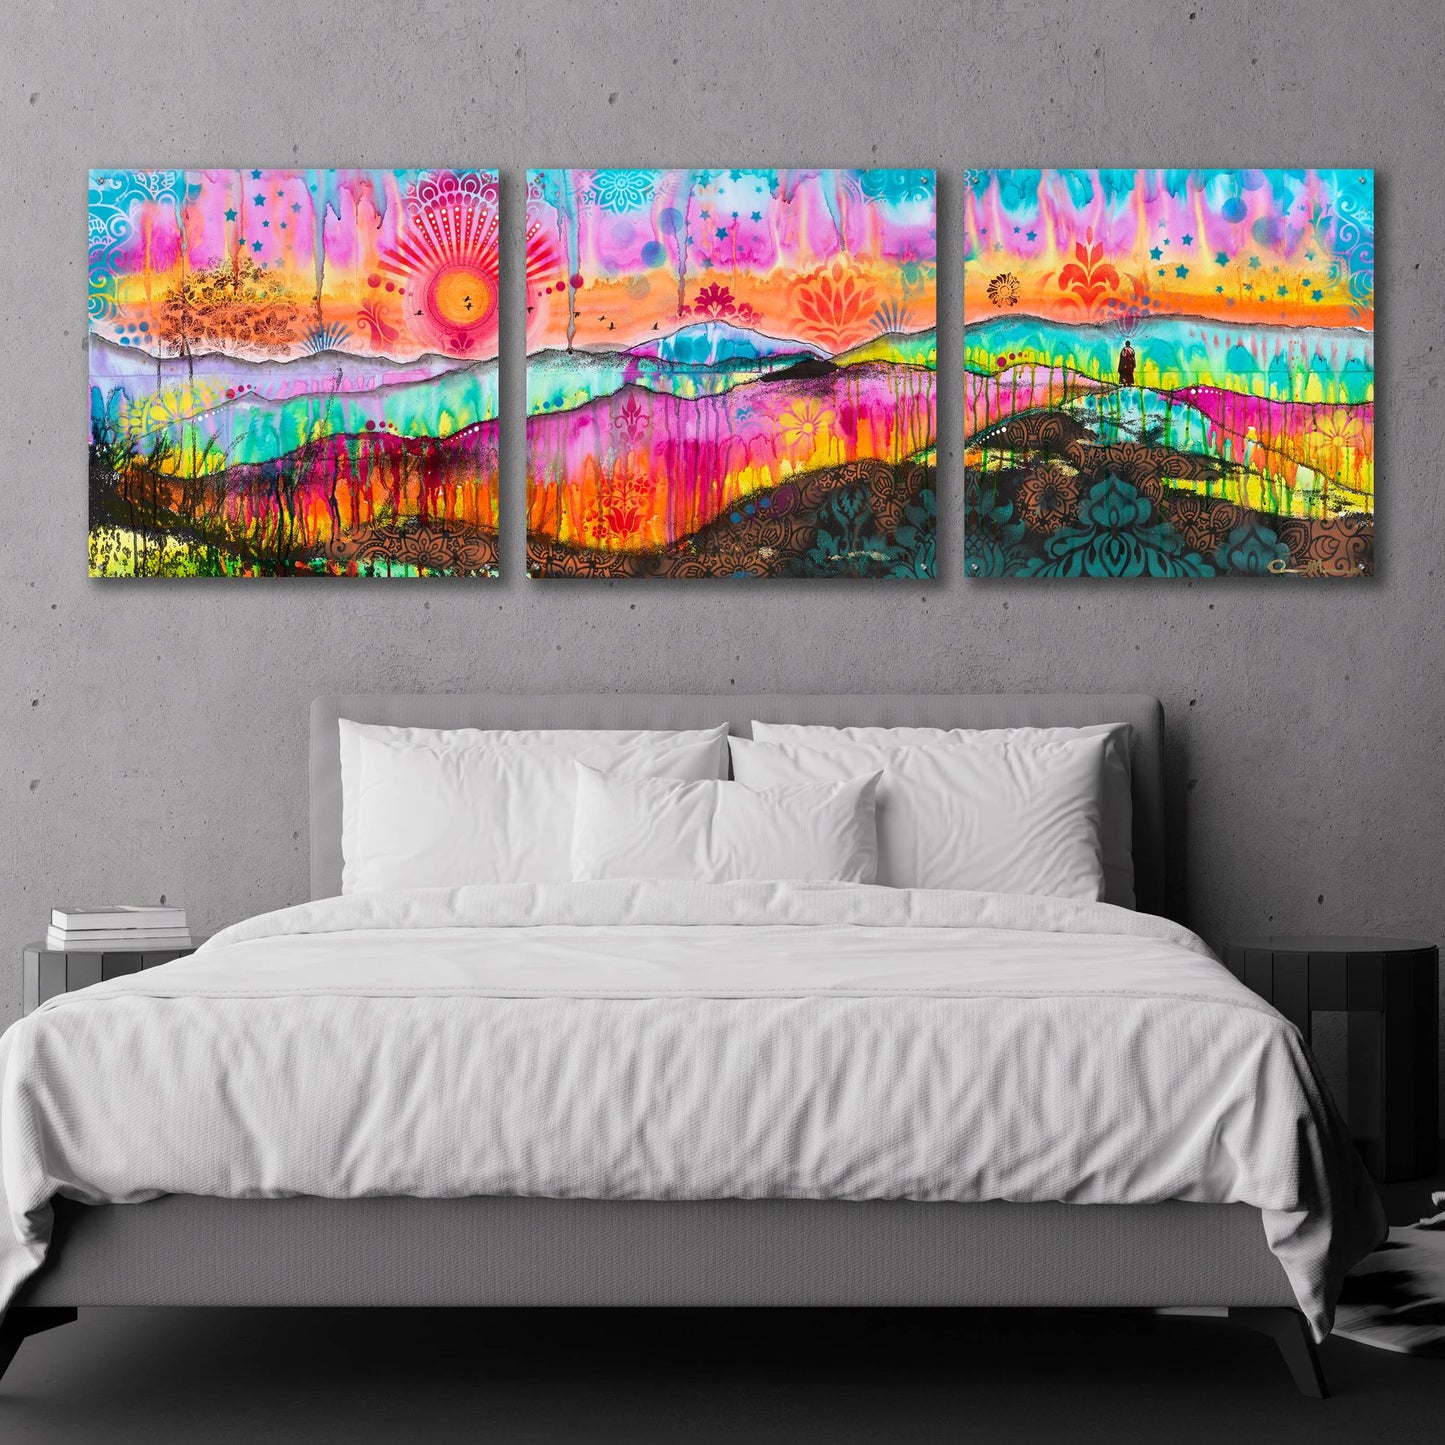 Epic Art 'The Wandering Monk' by Dean Russo, Acrylic Glass Wall Art, 3 Piece Set,108x36